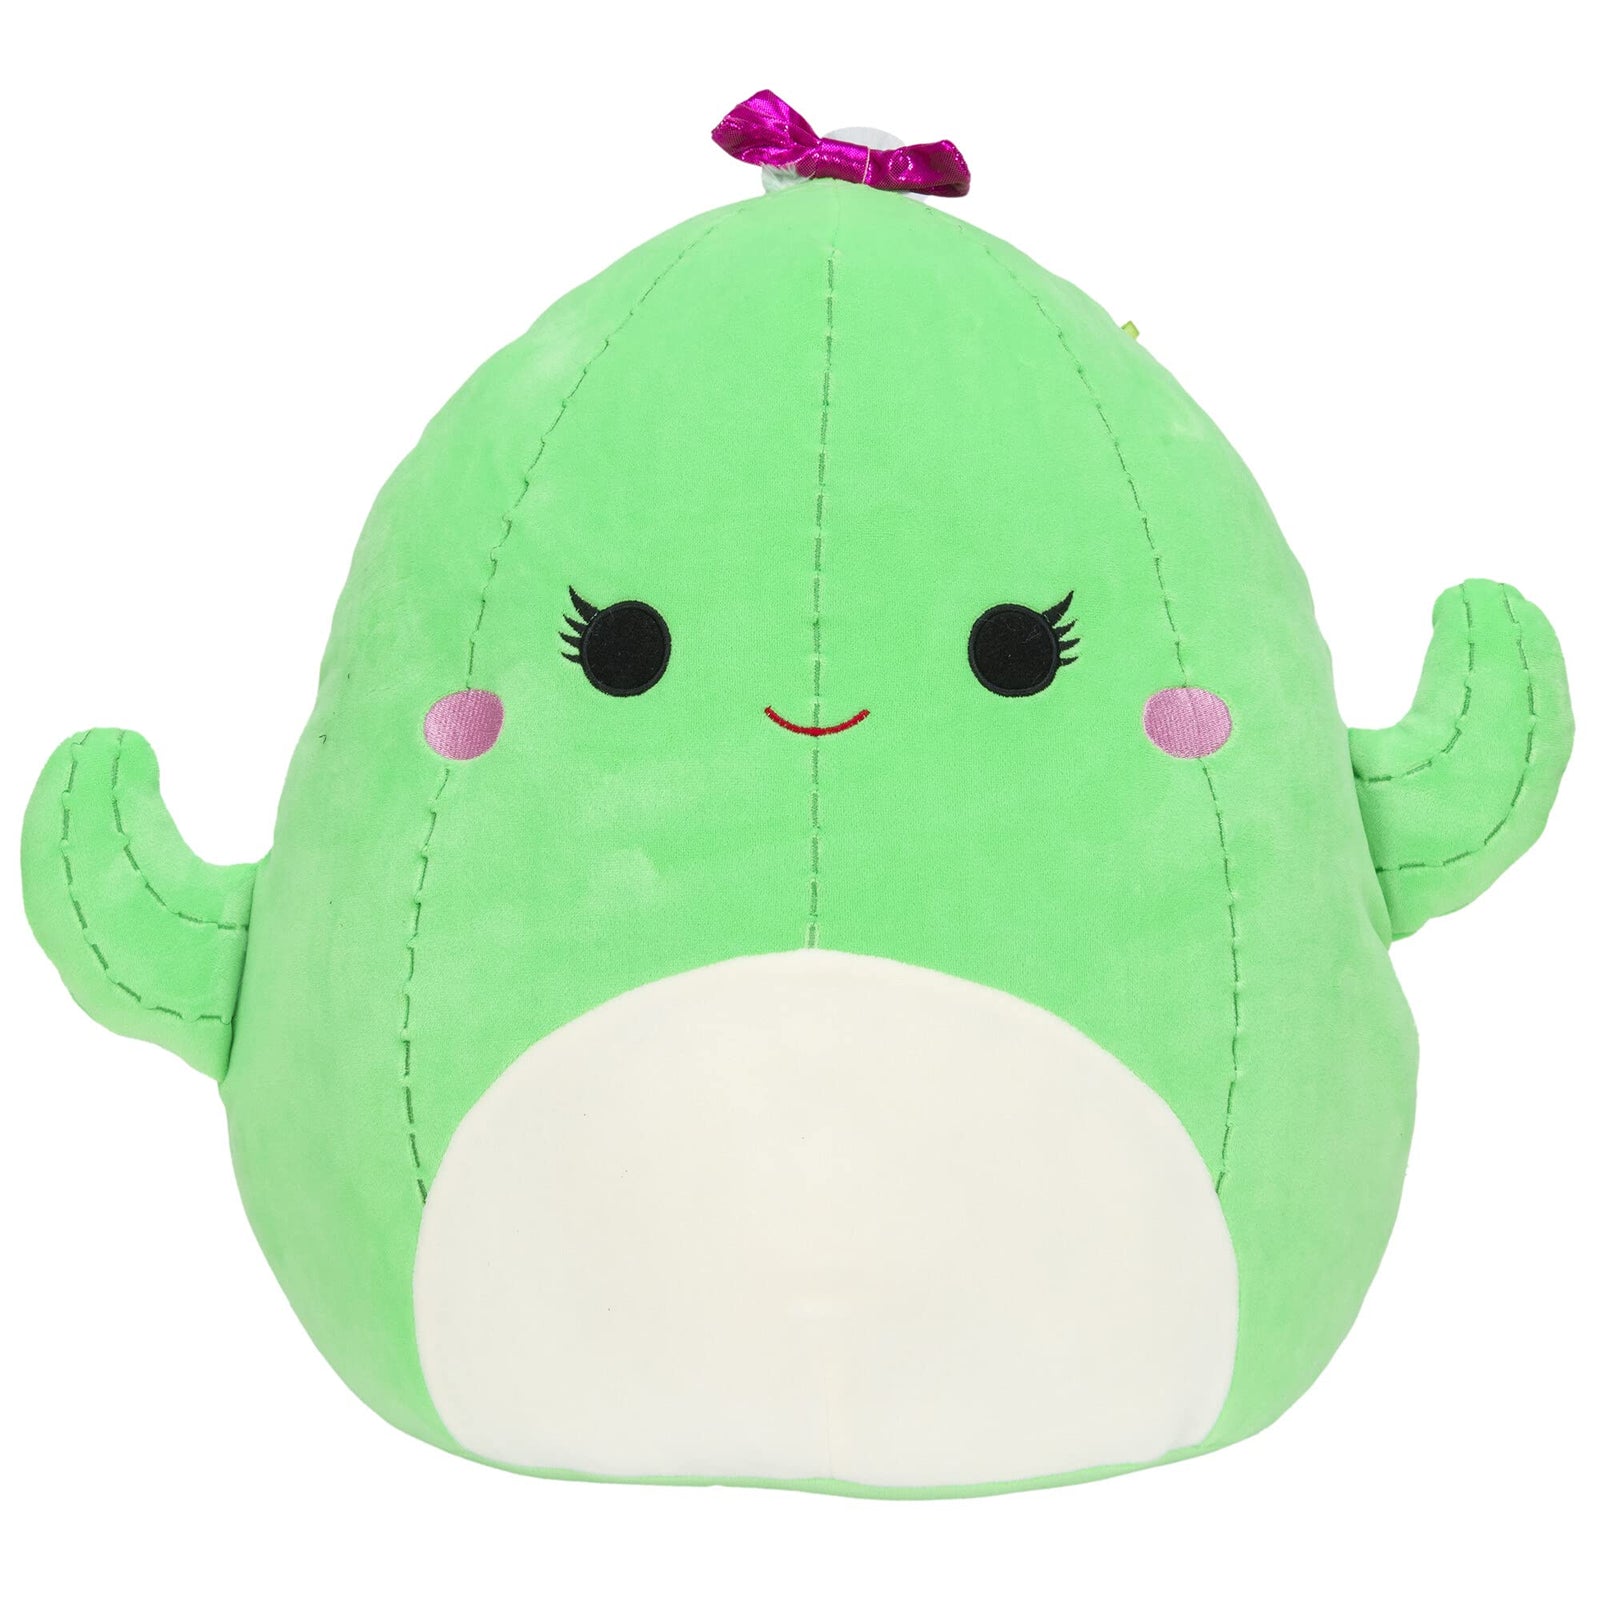 Squishmallow 16-Inch Cactus - Add Maritza to Your Squad, Ultrasoft Stuffed Animal Large Plush Toy, Official Kellytoy Plush